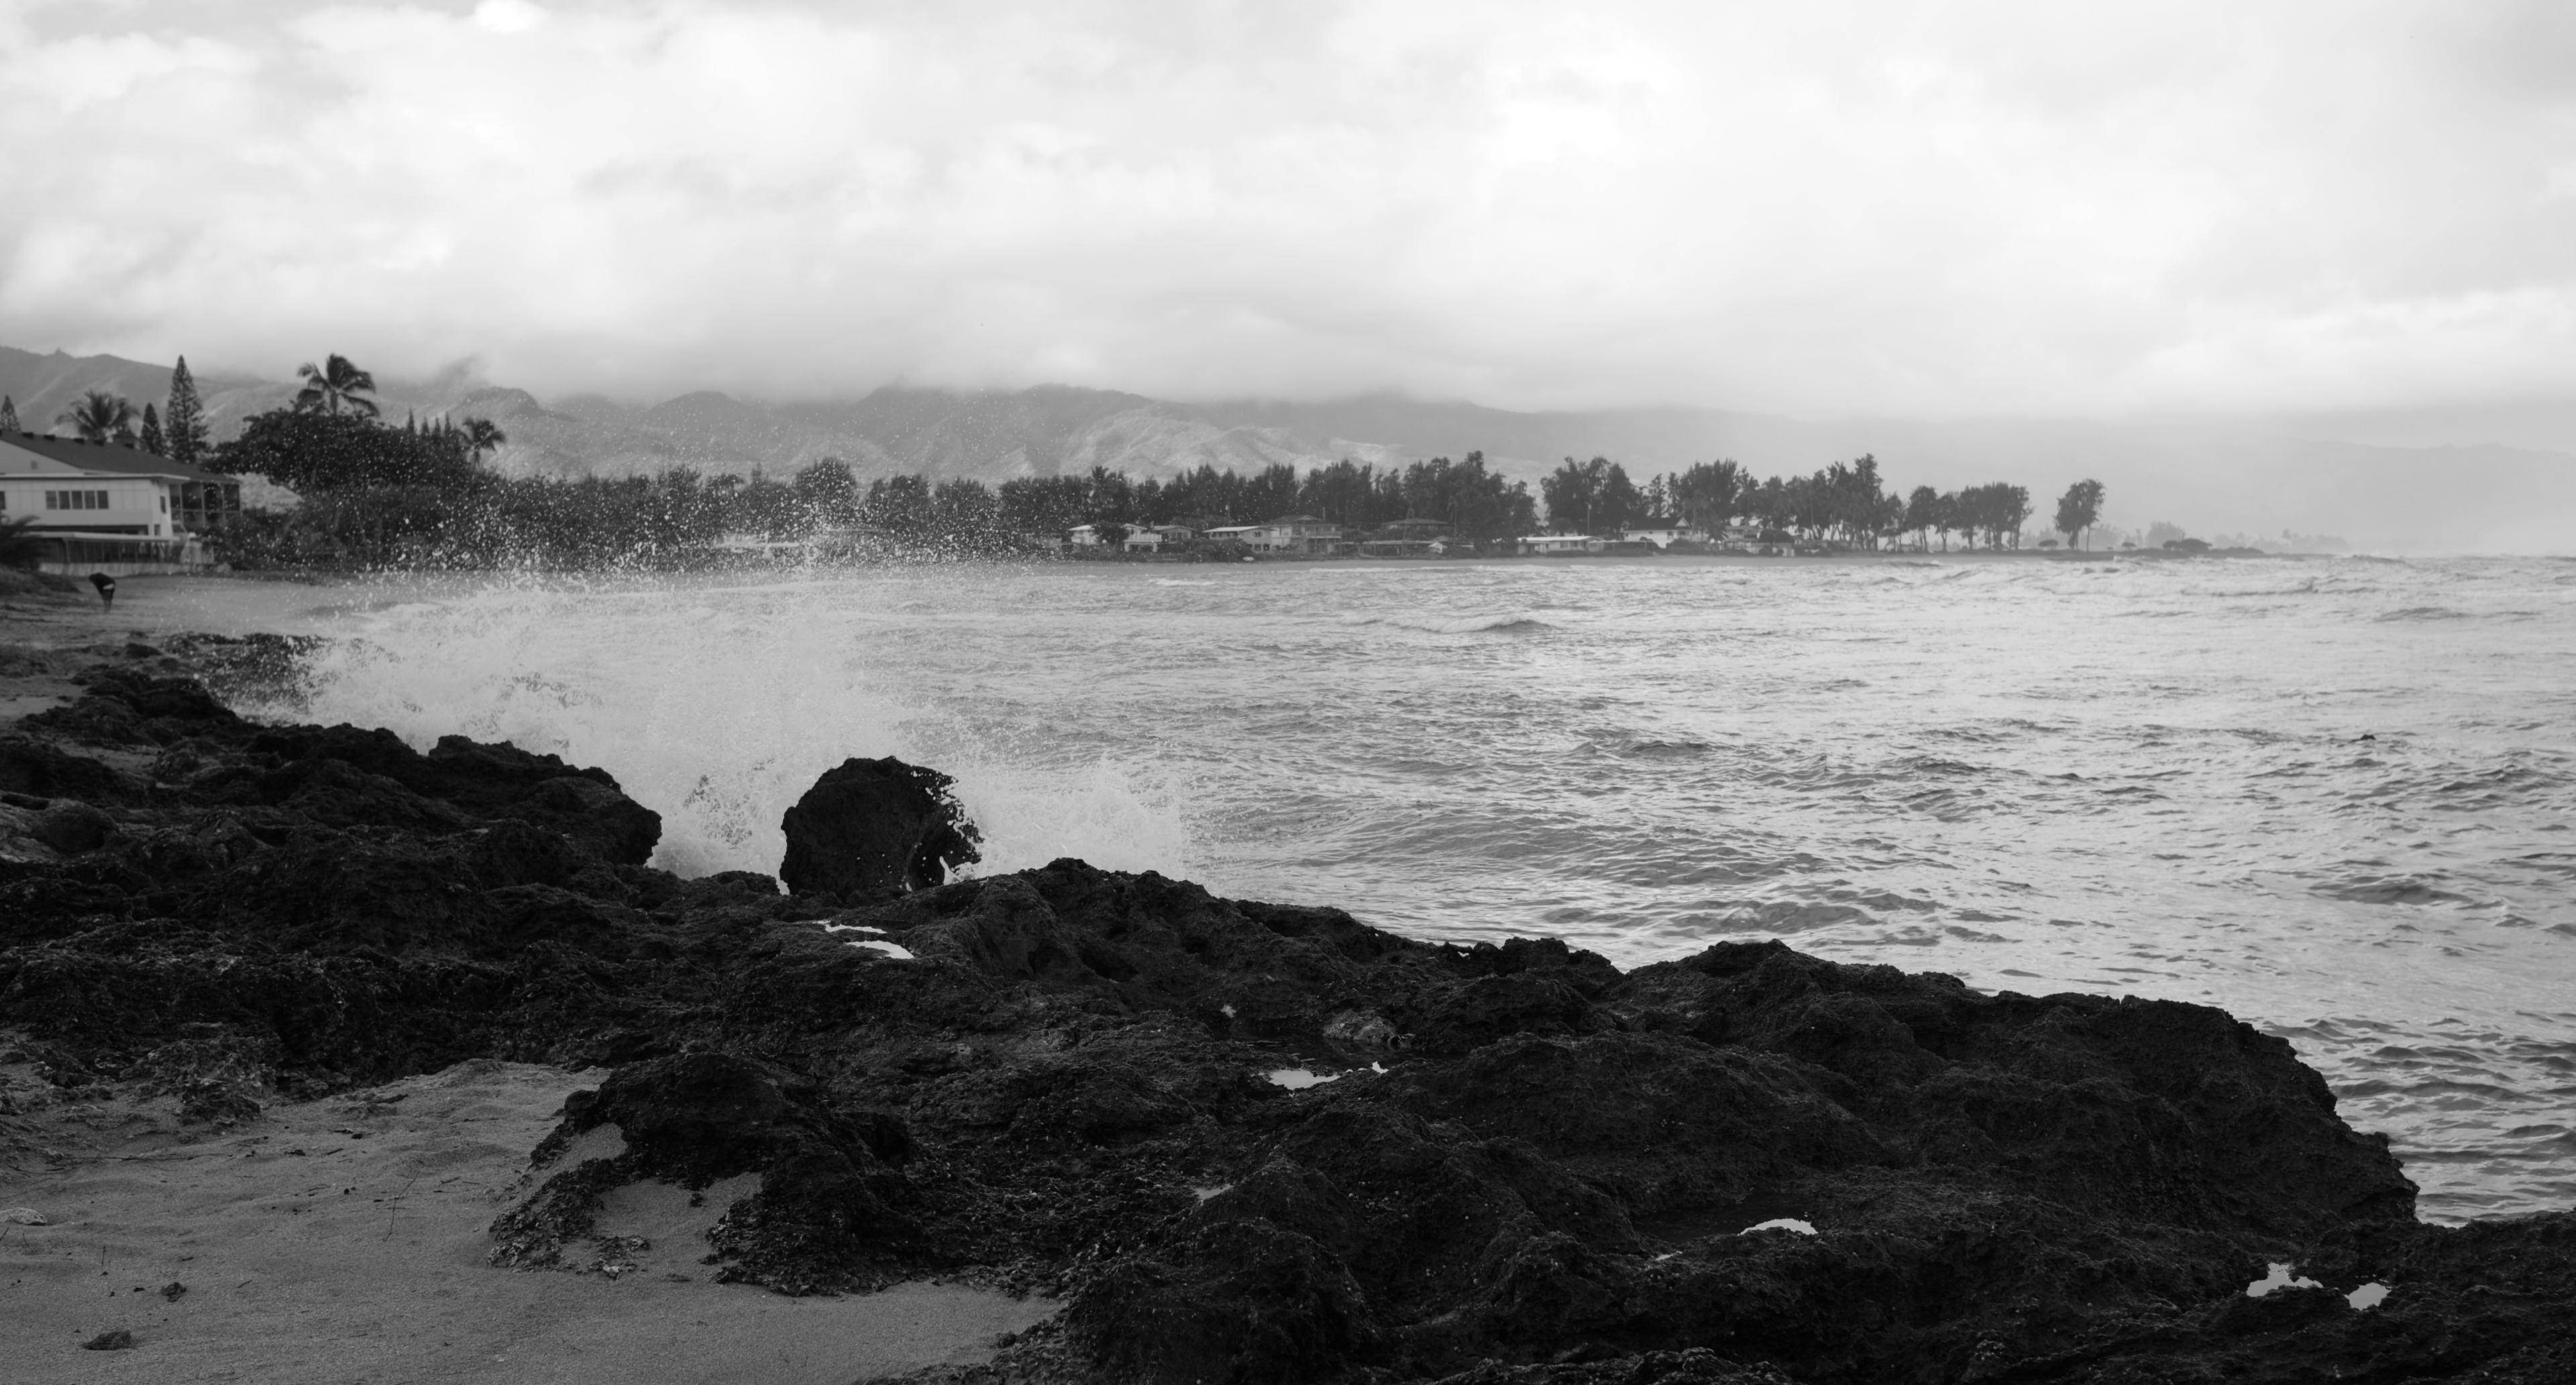 Waves softly crashing on the black rocks. A beach on the left leading to a peninsula of houses on the other side — a man is walking away from the camera a medium distance away. A cloudy mountain ridgeline in the far distance.